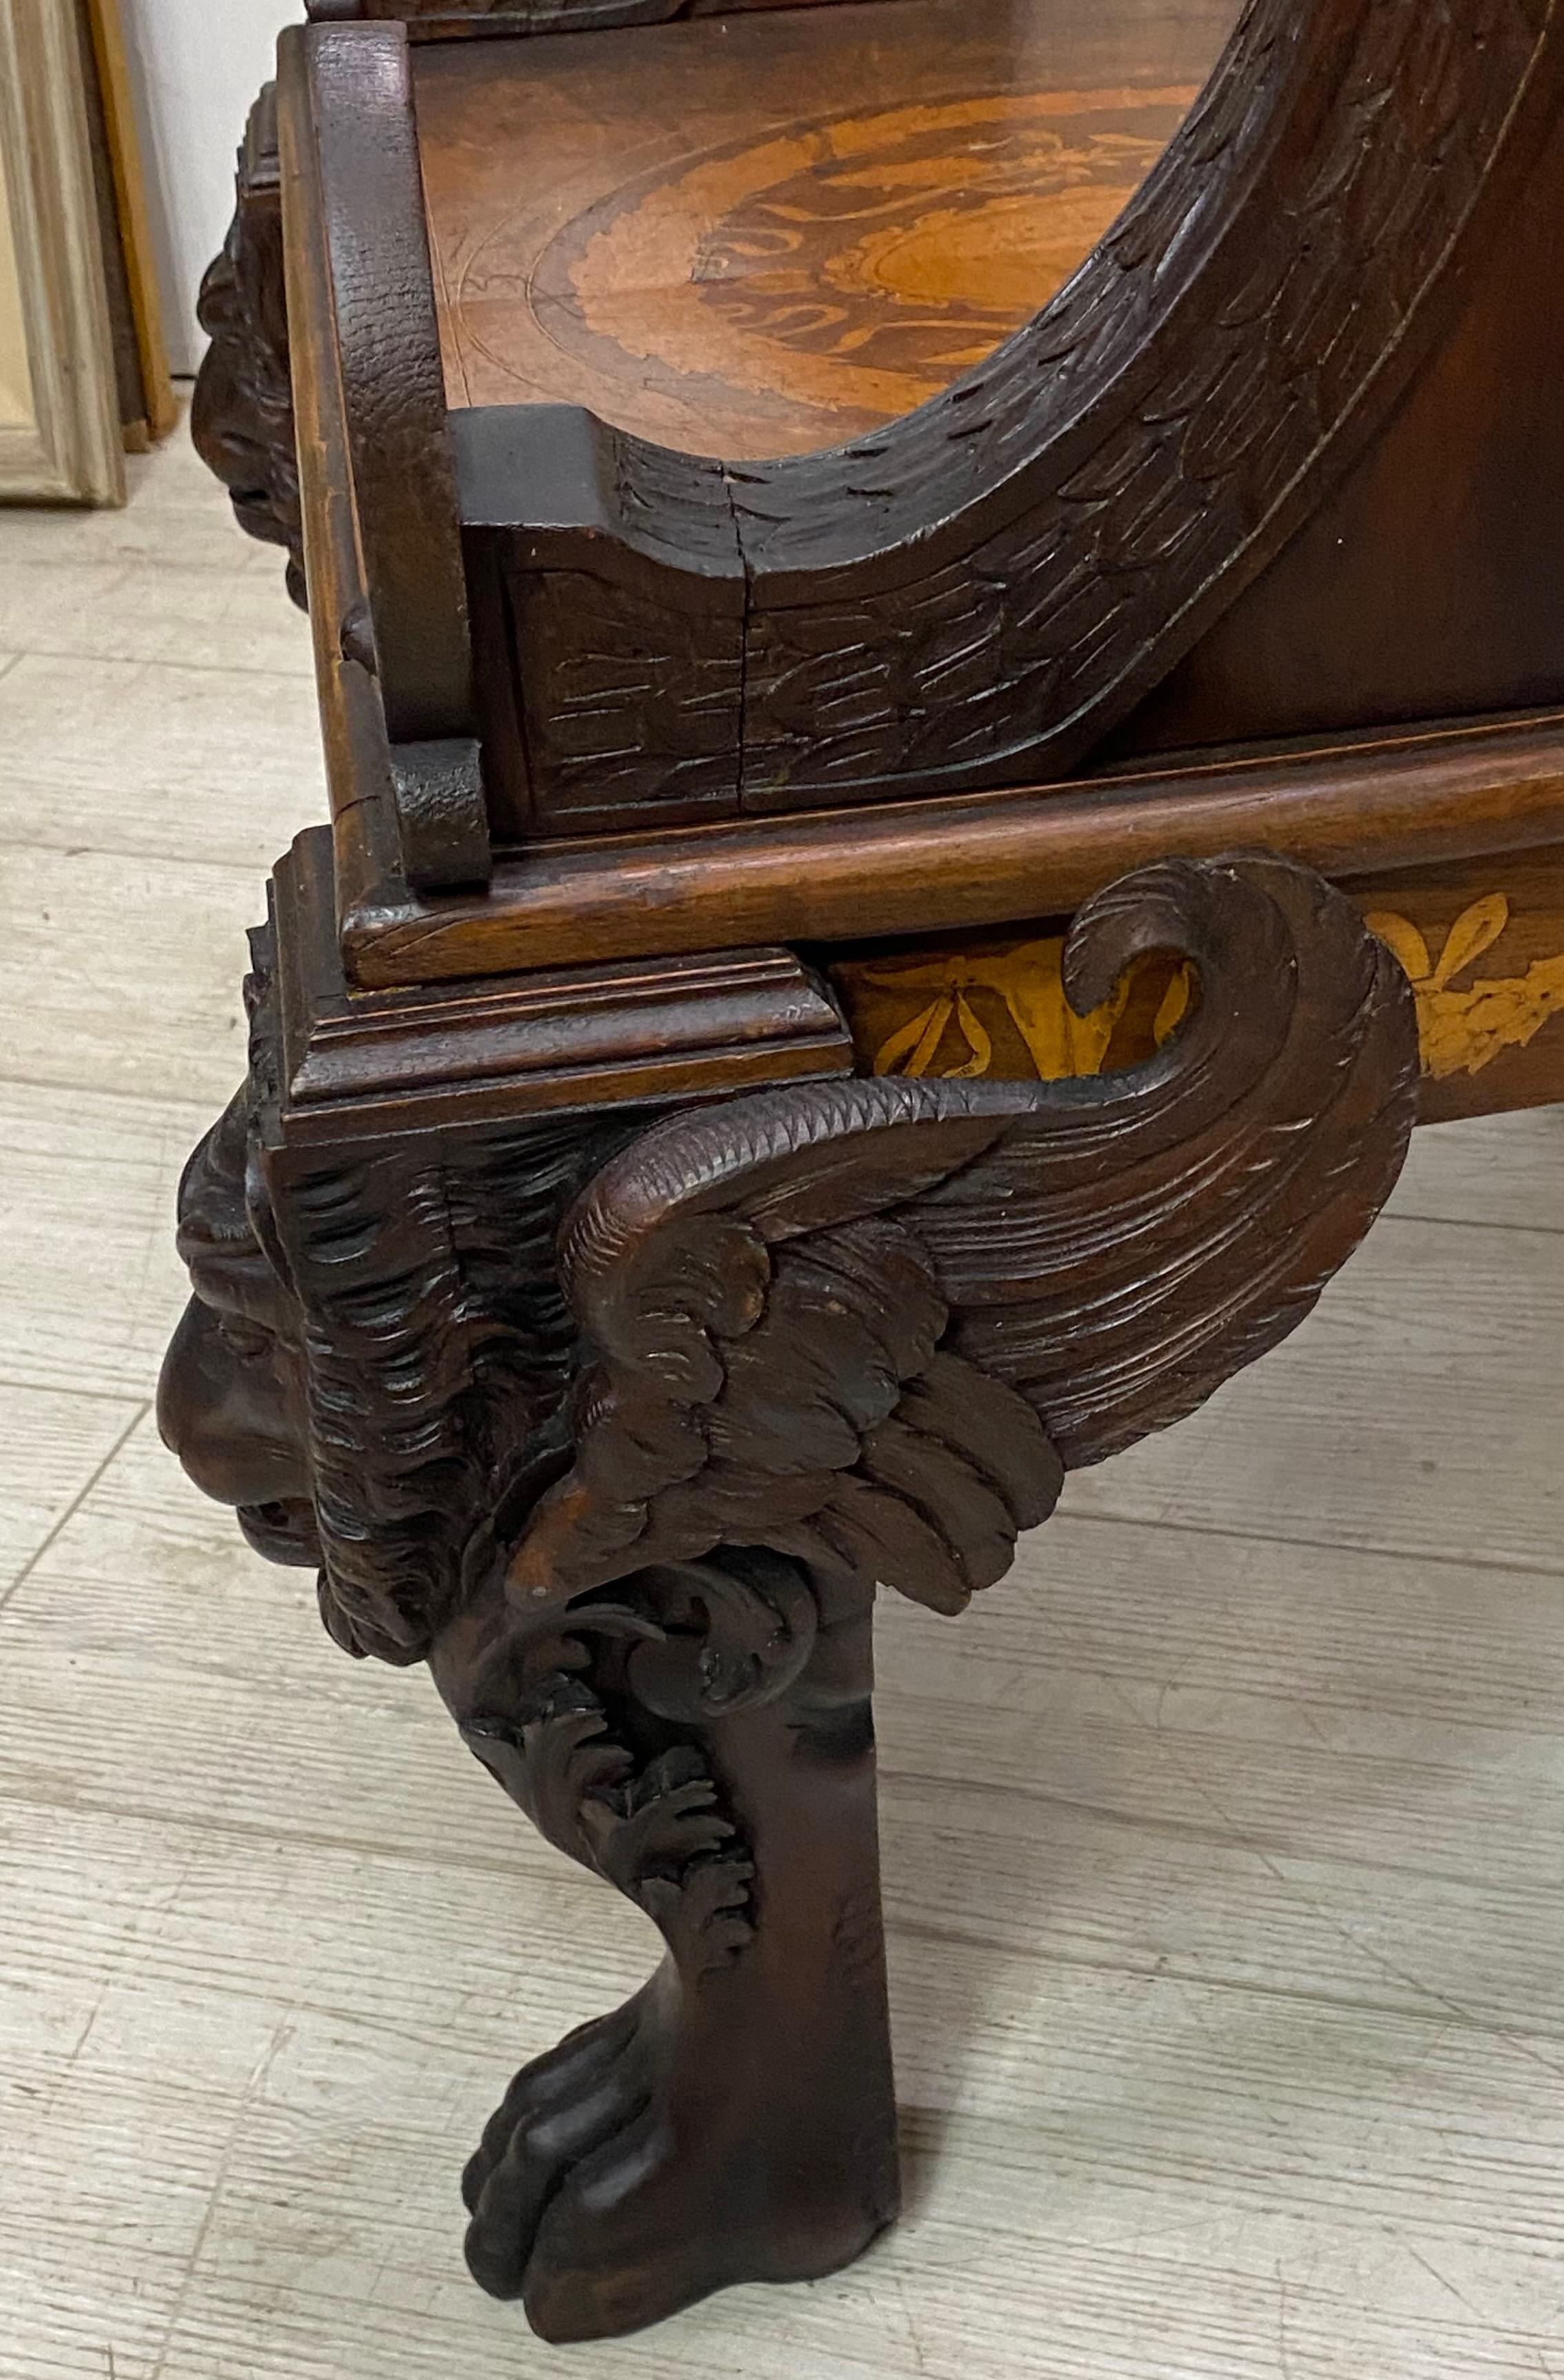 Neoclassical Revival Grand Tour Period Walnut Chair, Italian 19th Century For Sale 4